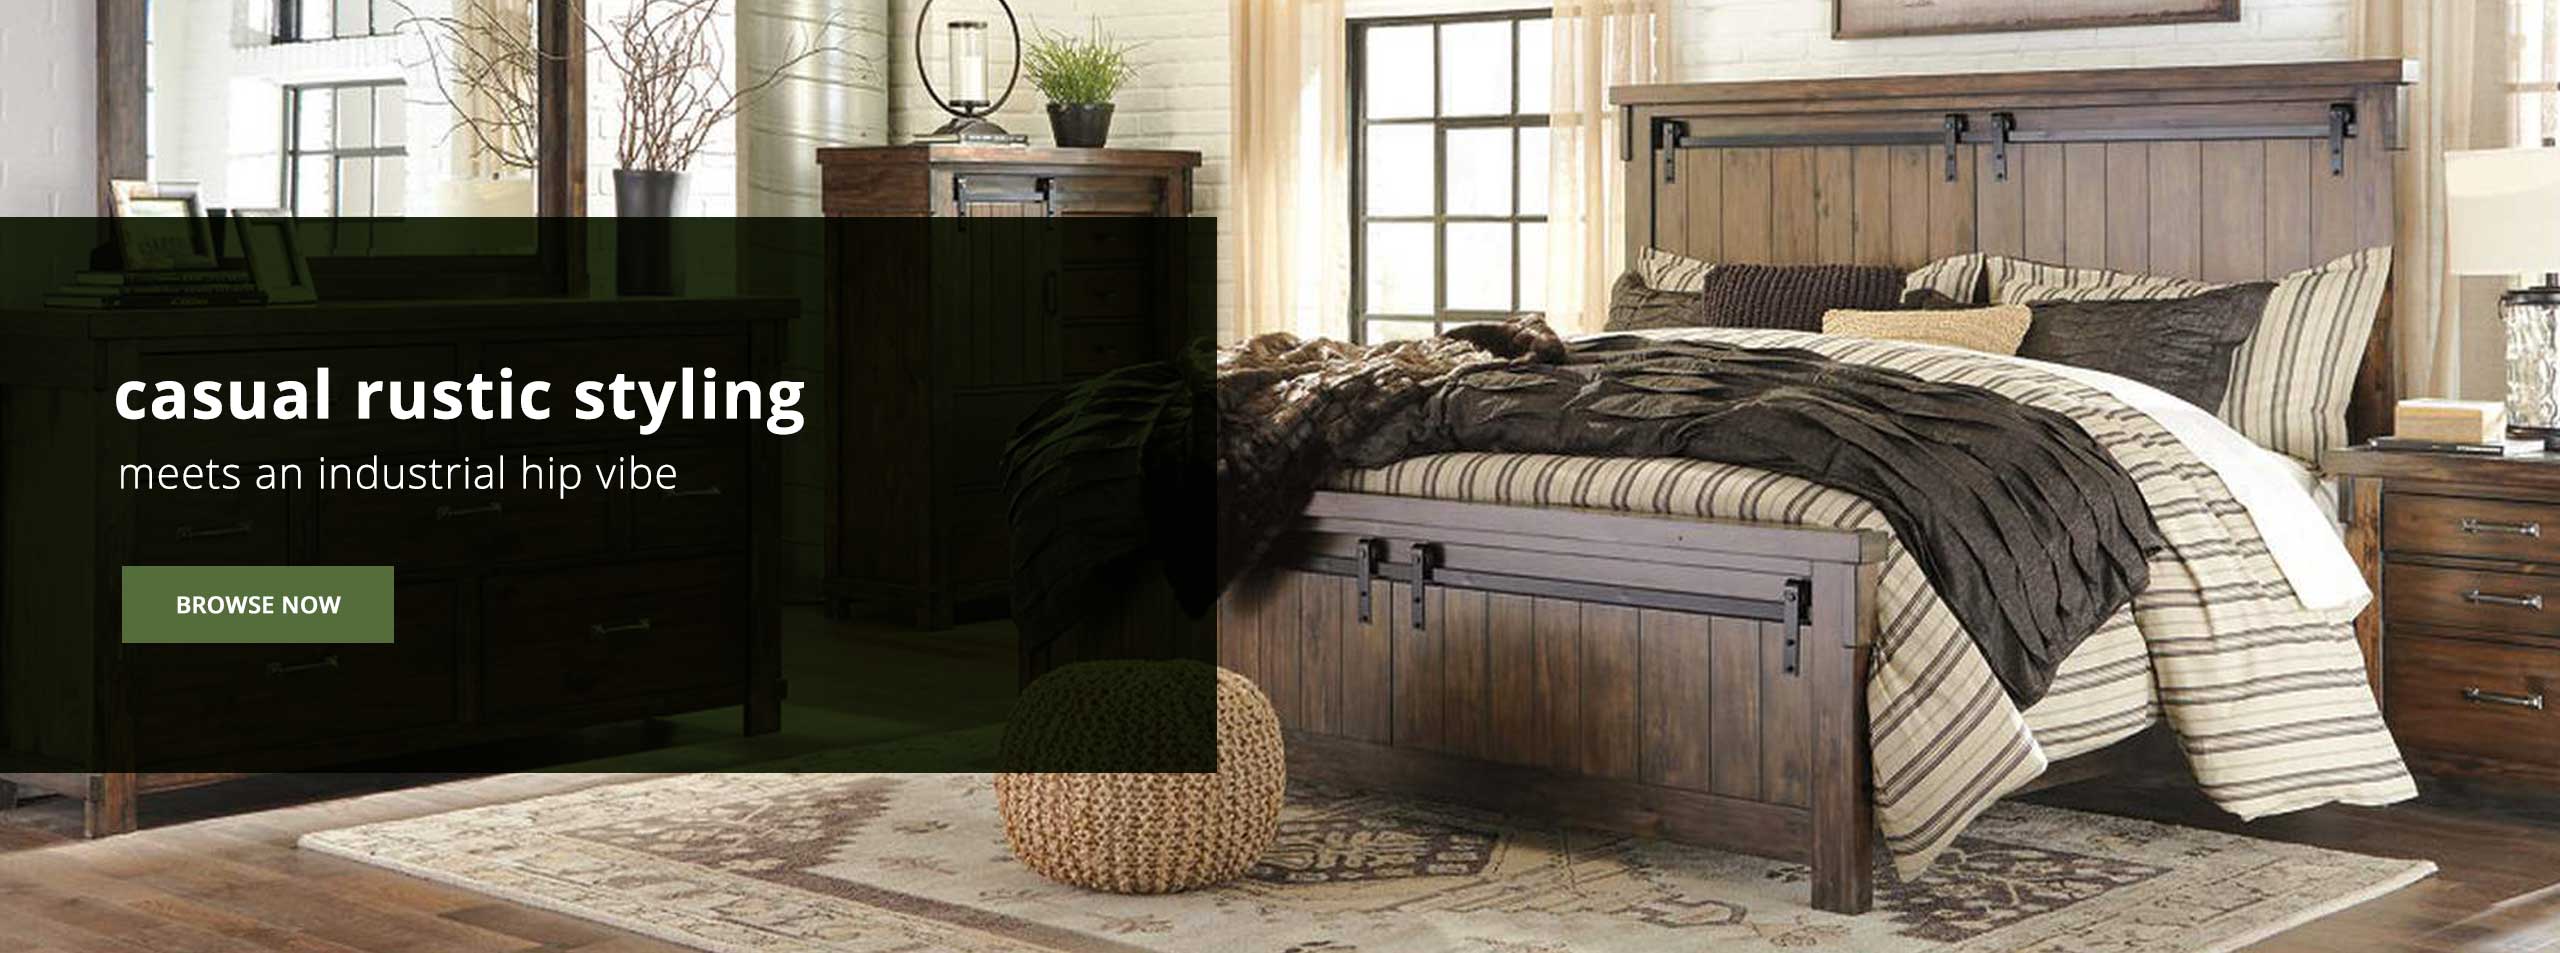 Bedrooms - Browse Now